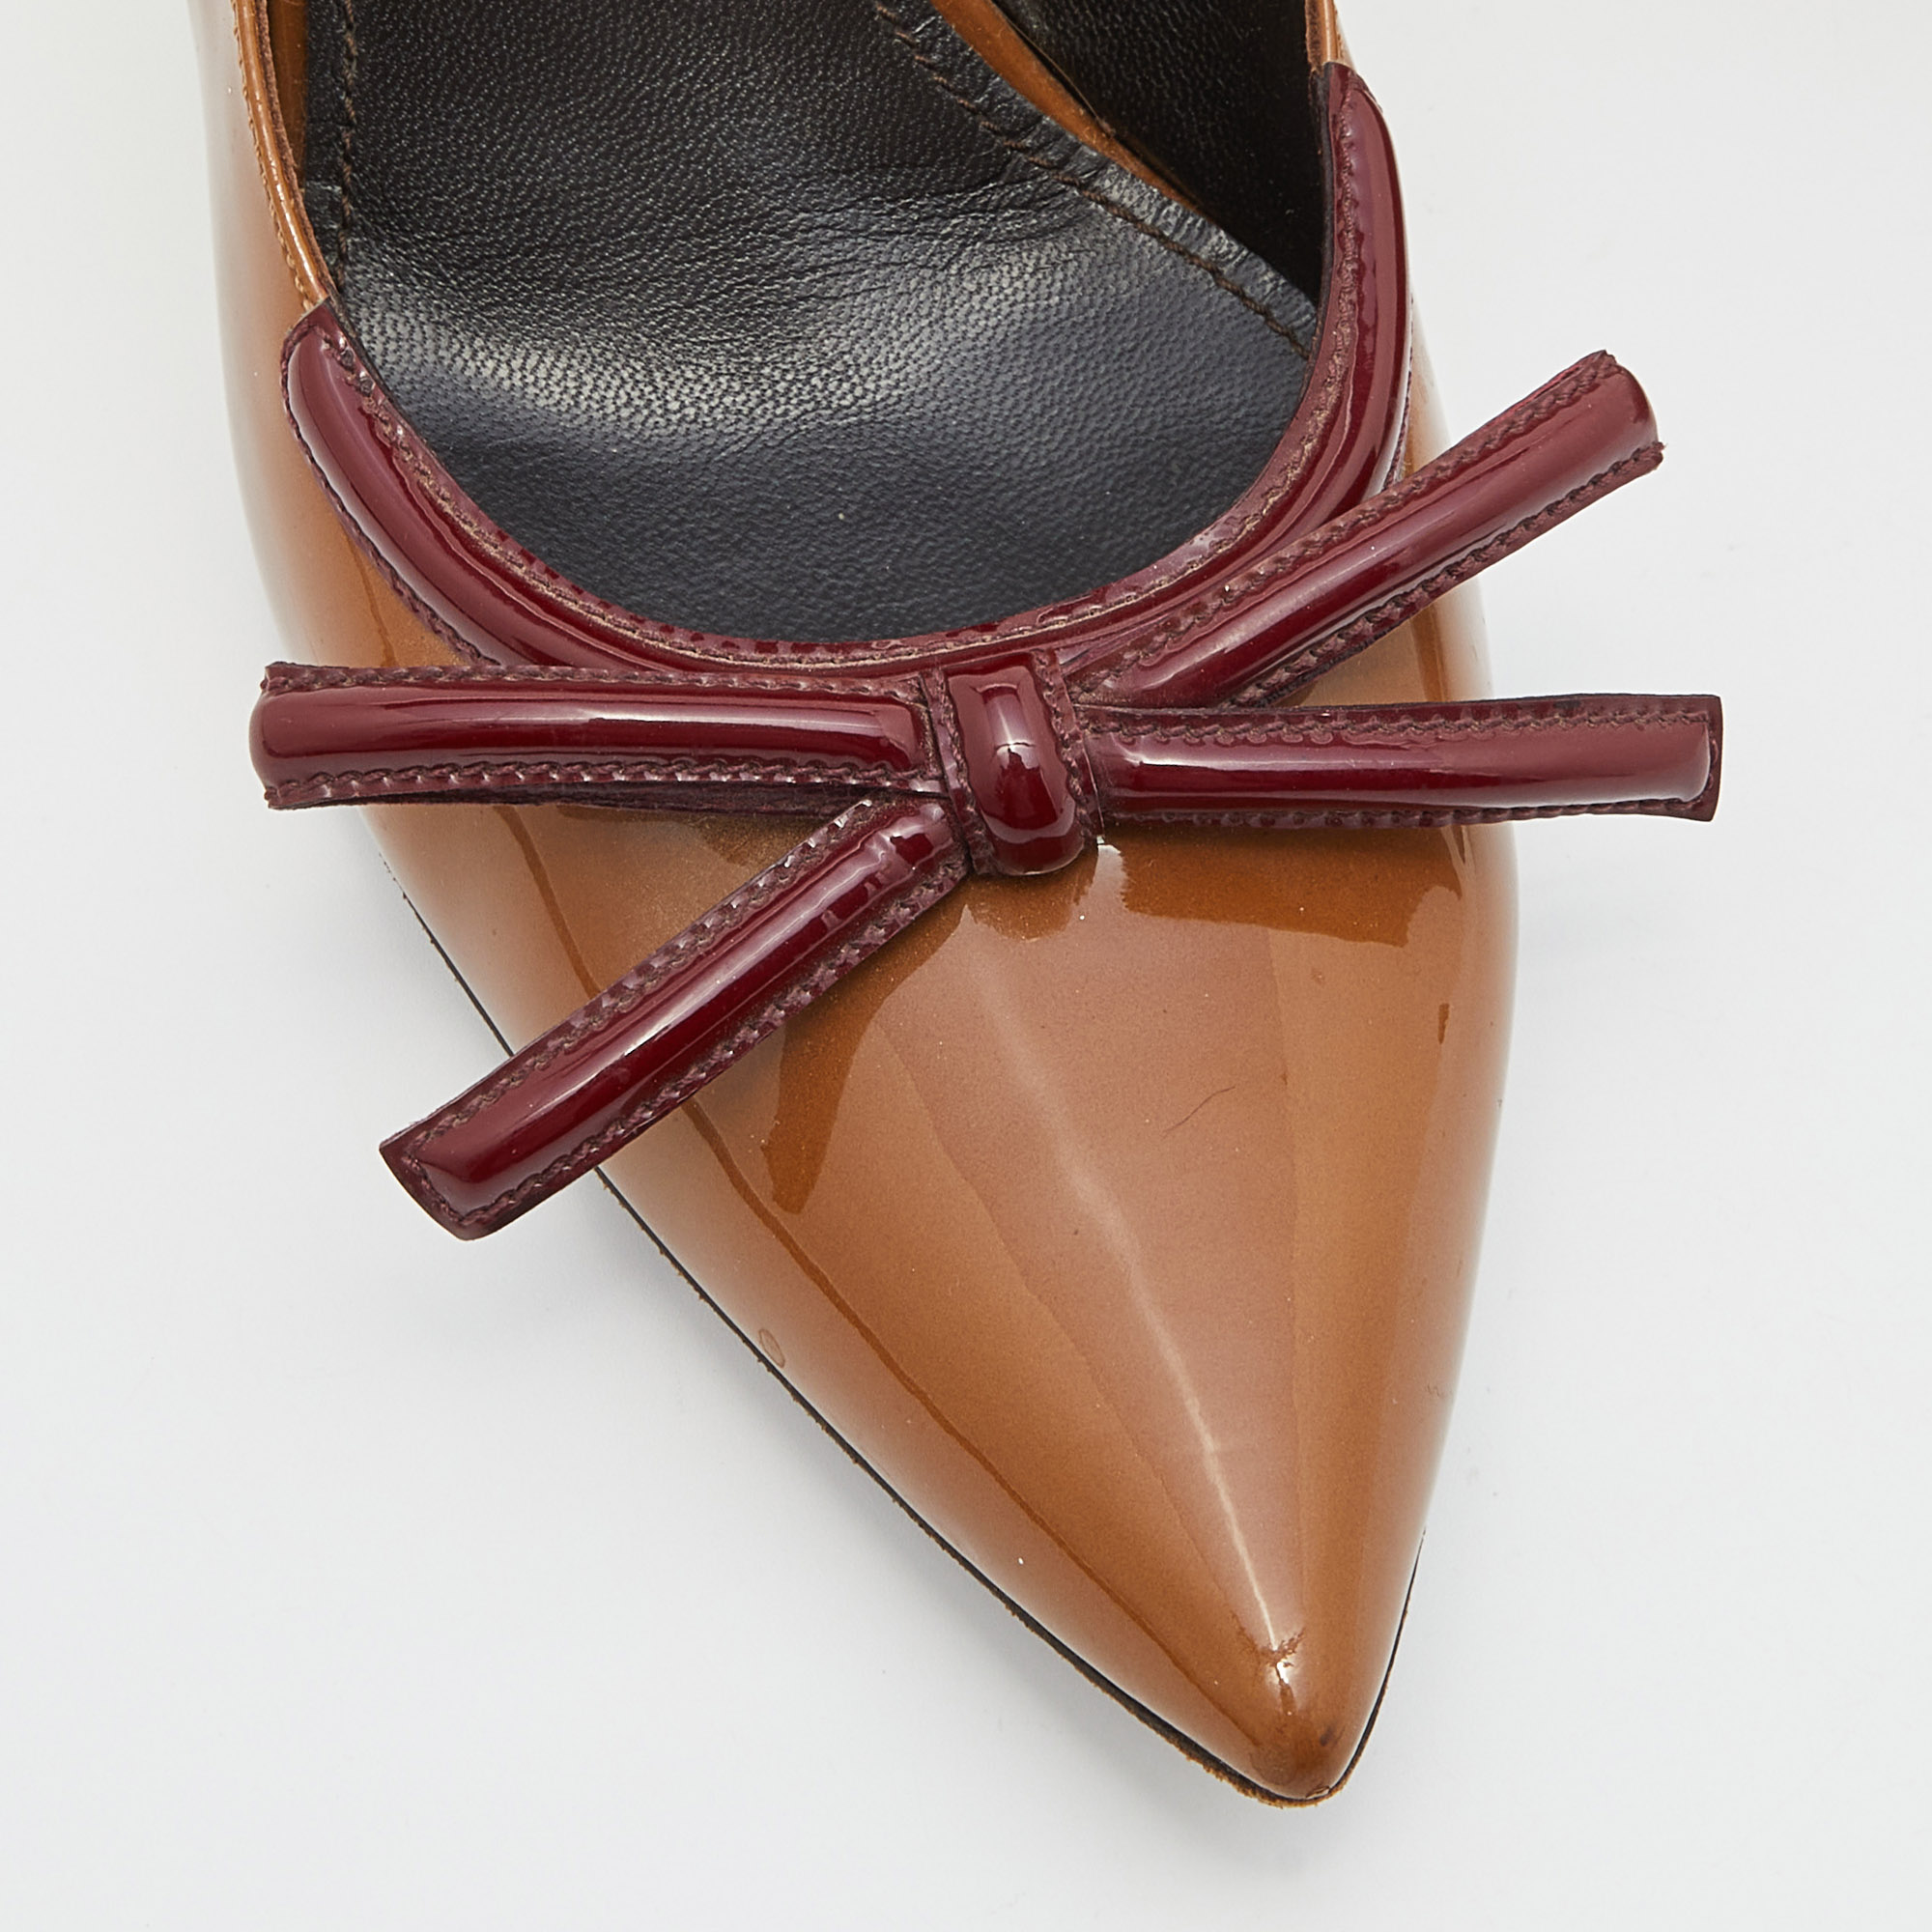 Prada Brown/Red Patent Leather Bow Pointed Pumps Size 39.5